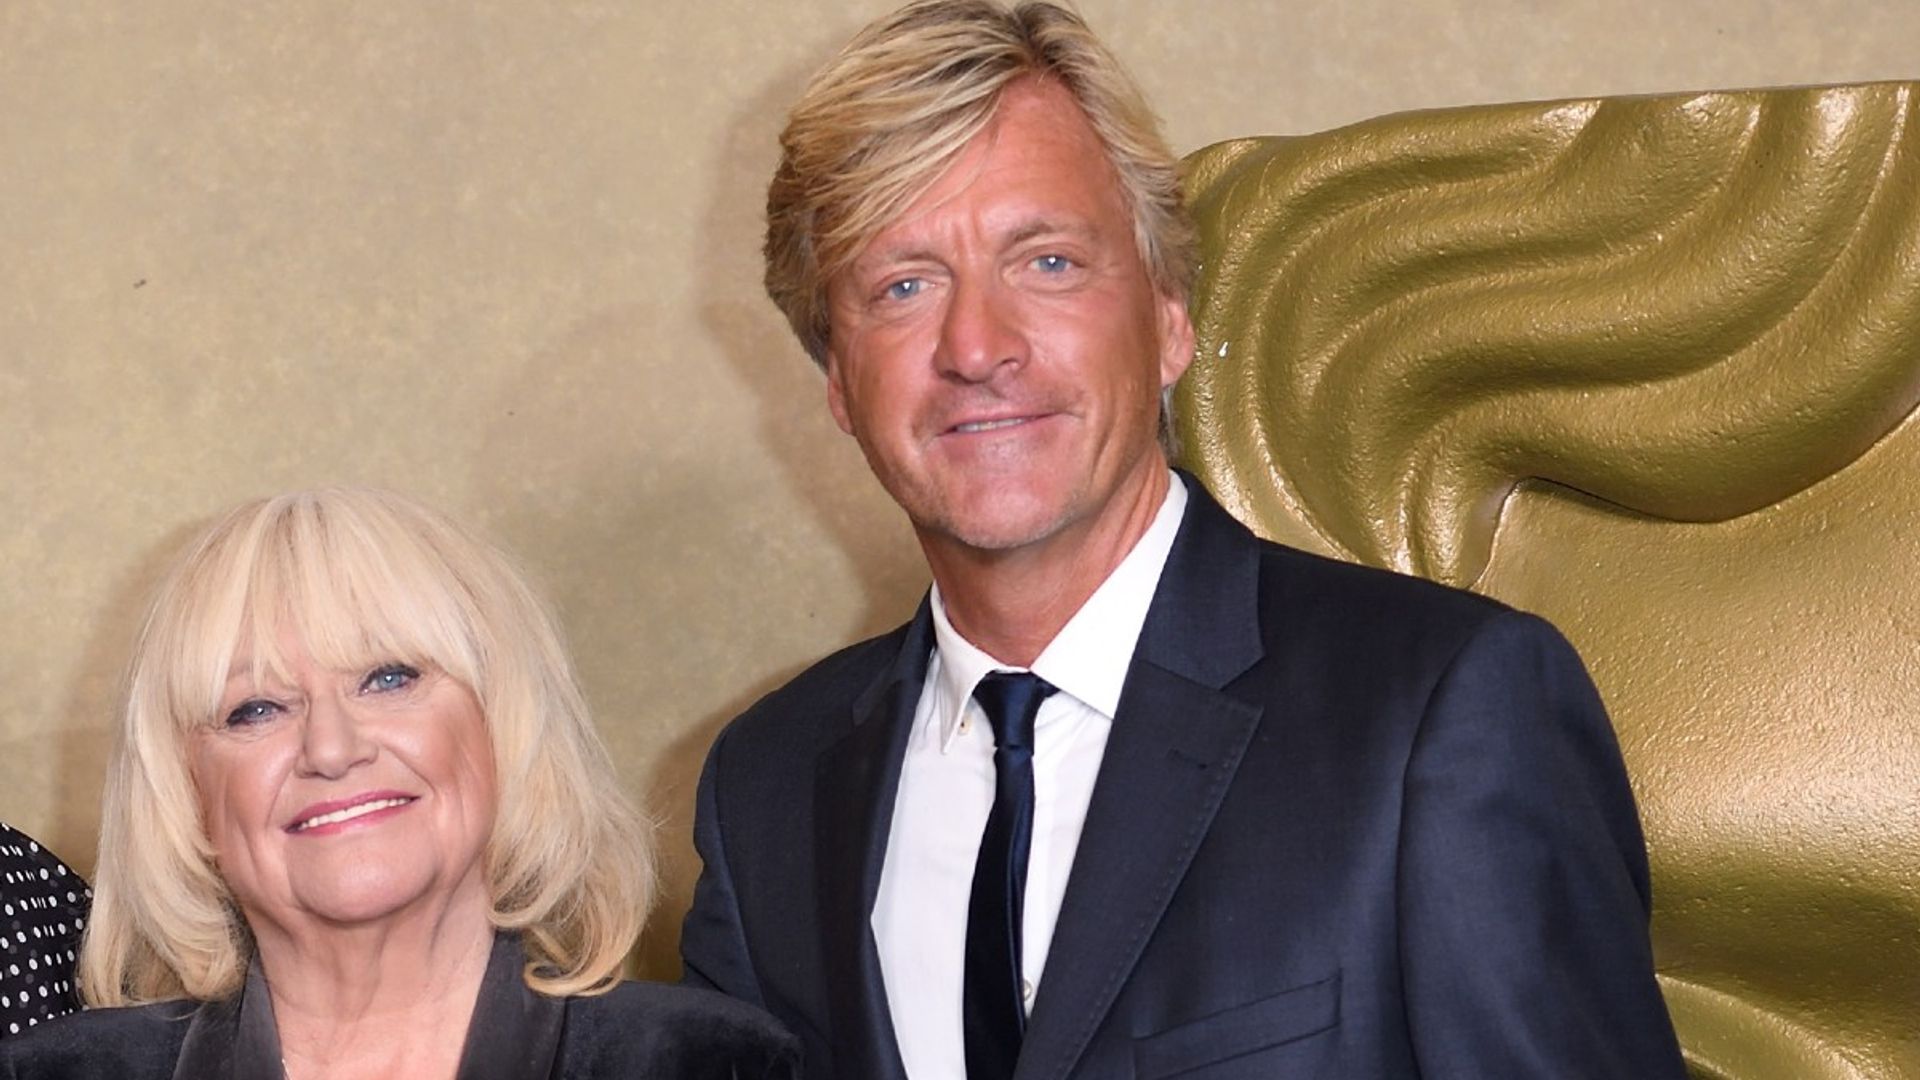 Richard Madeley and Judy Finnigan reveal secret to their happy marriage in lockdown